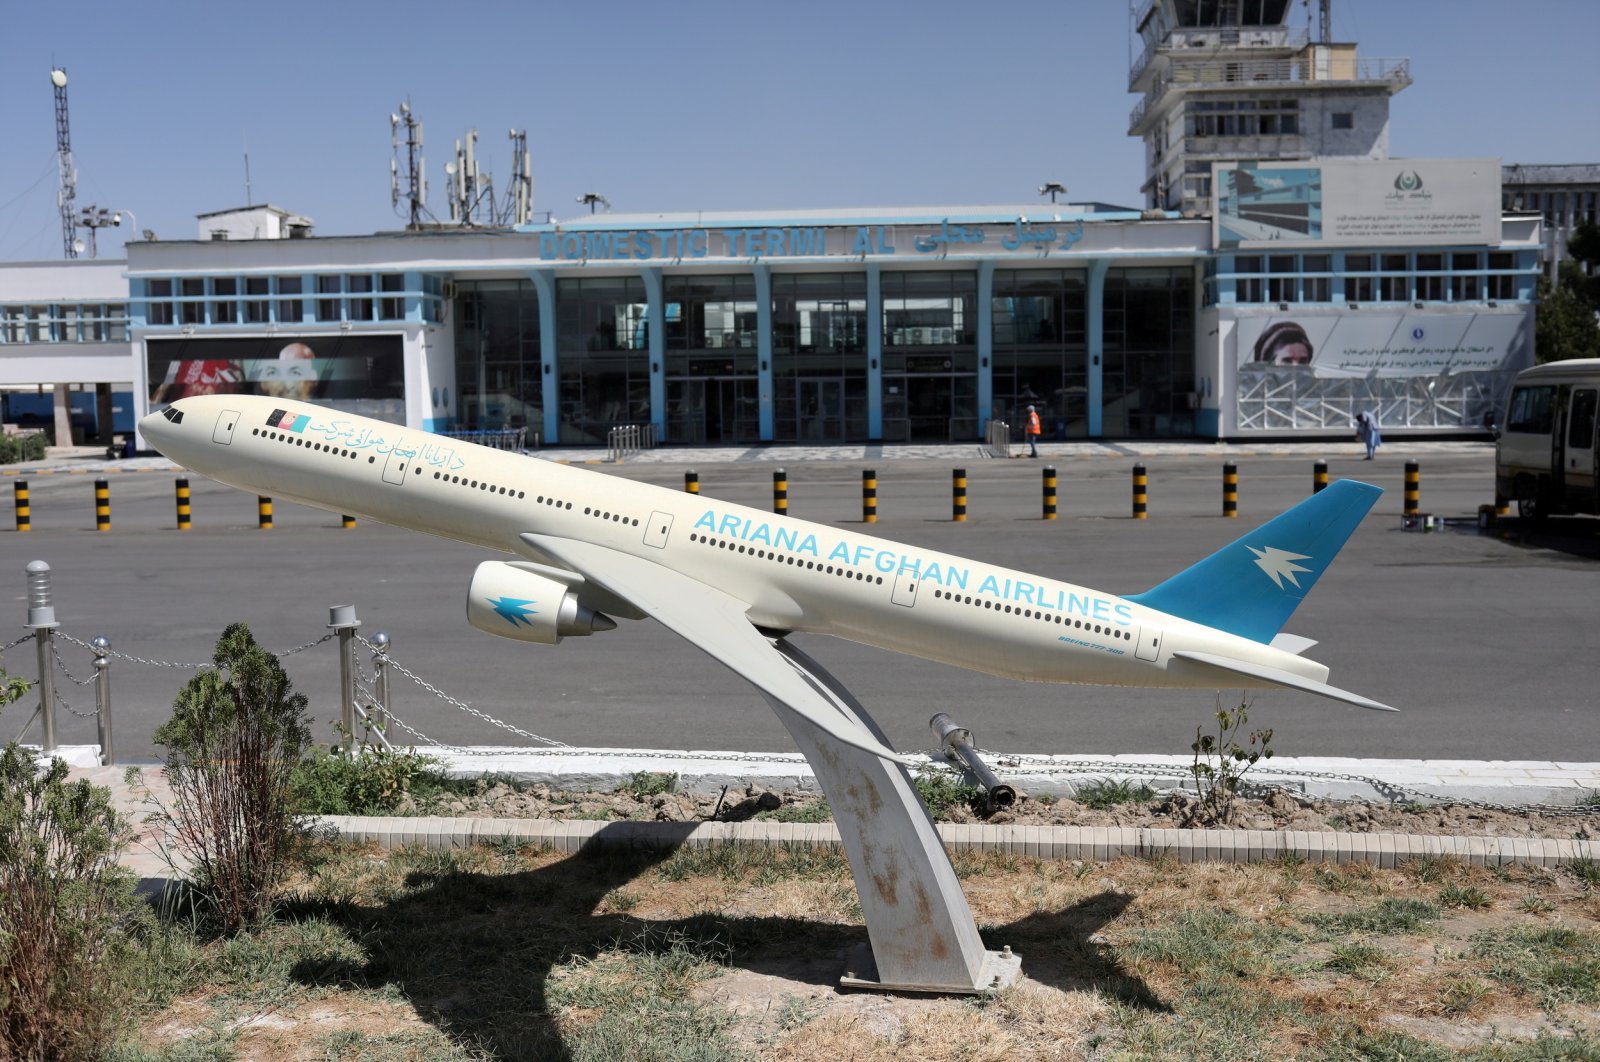 A model of an Ariana Afghan Airlines jet is seen in front of the international airport in Kabul, Afghanistan, Sept. 5, 2021. (WANA via Reuters)